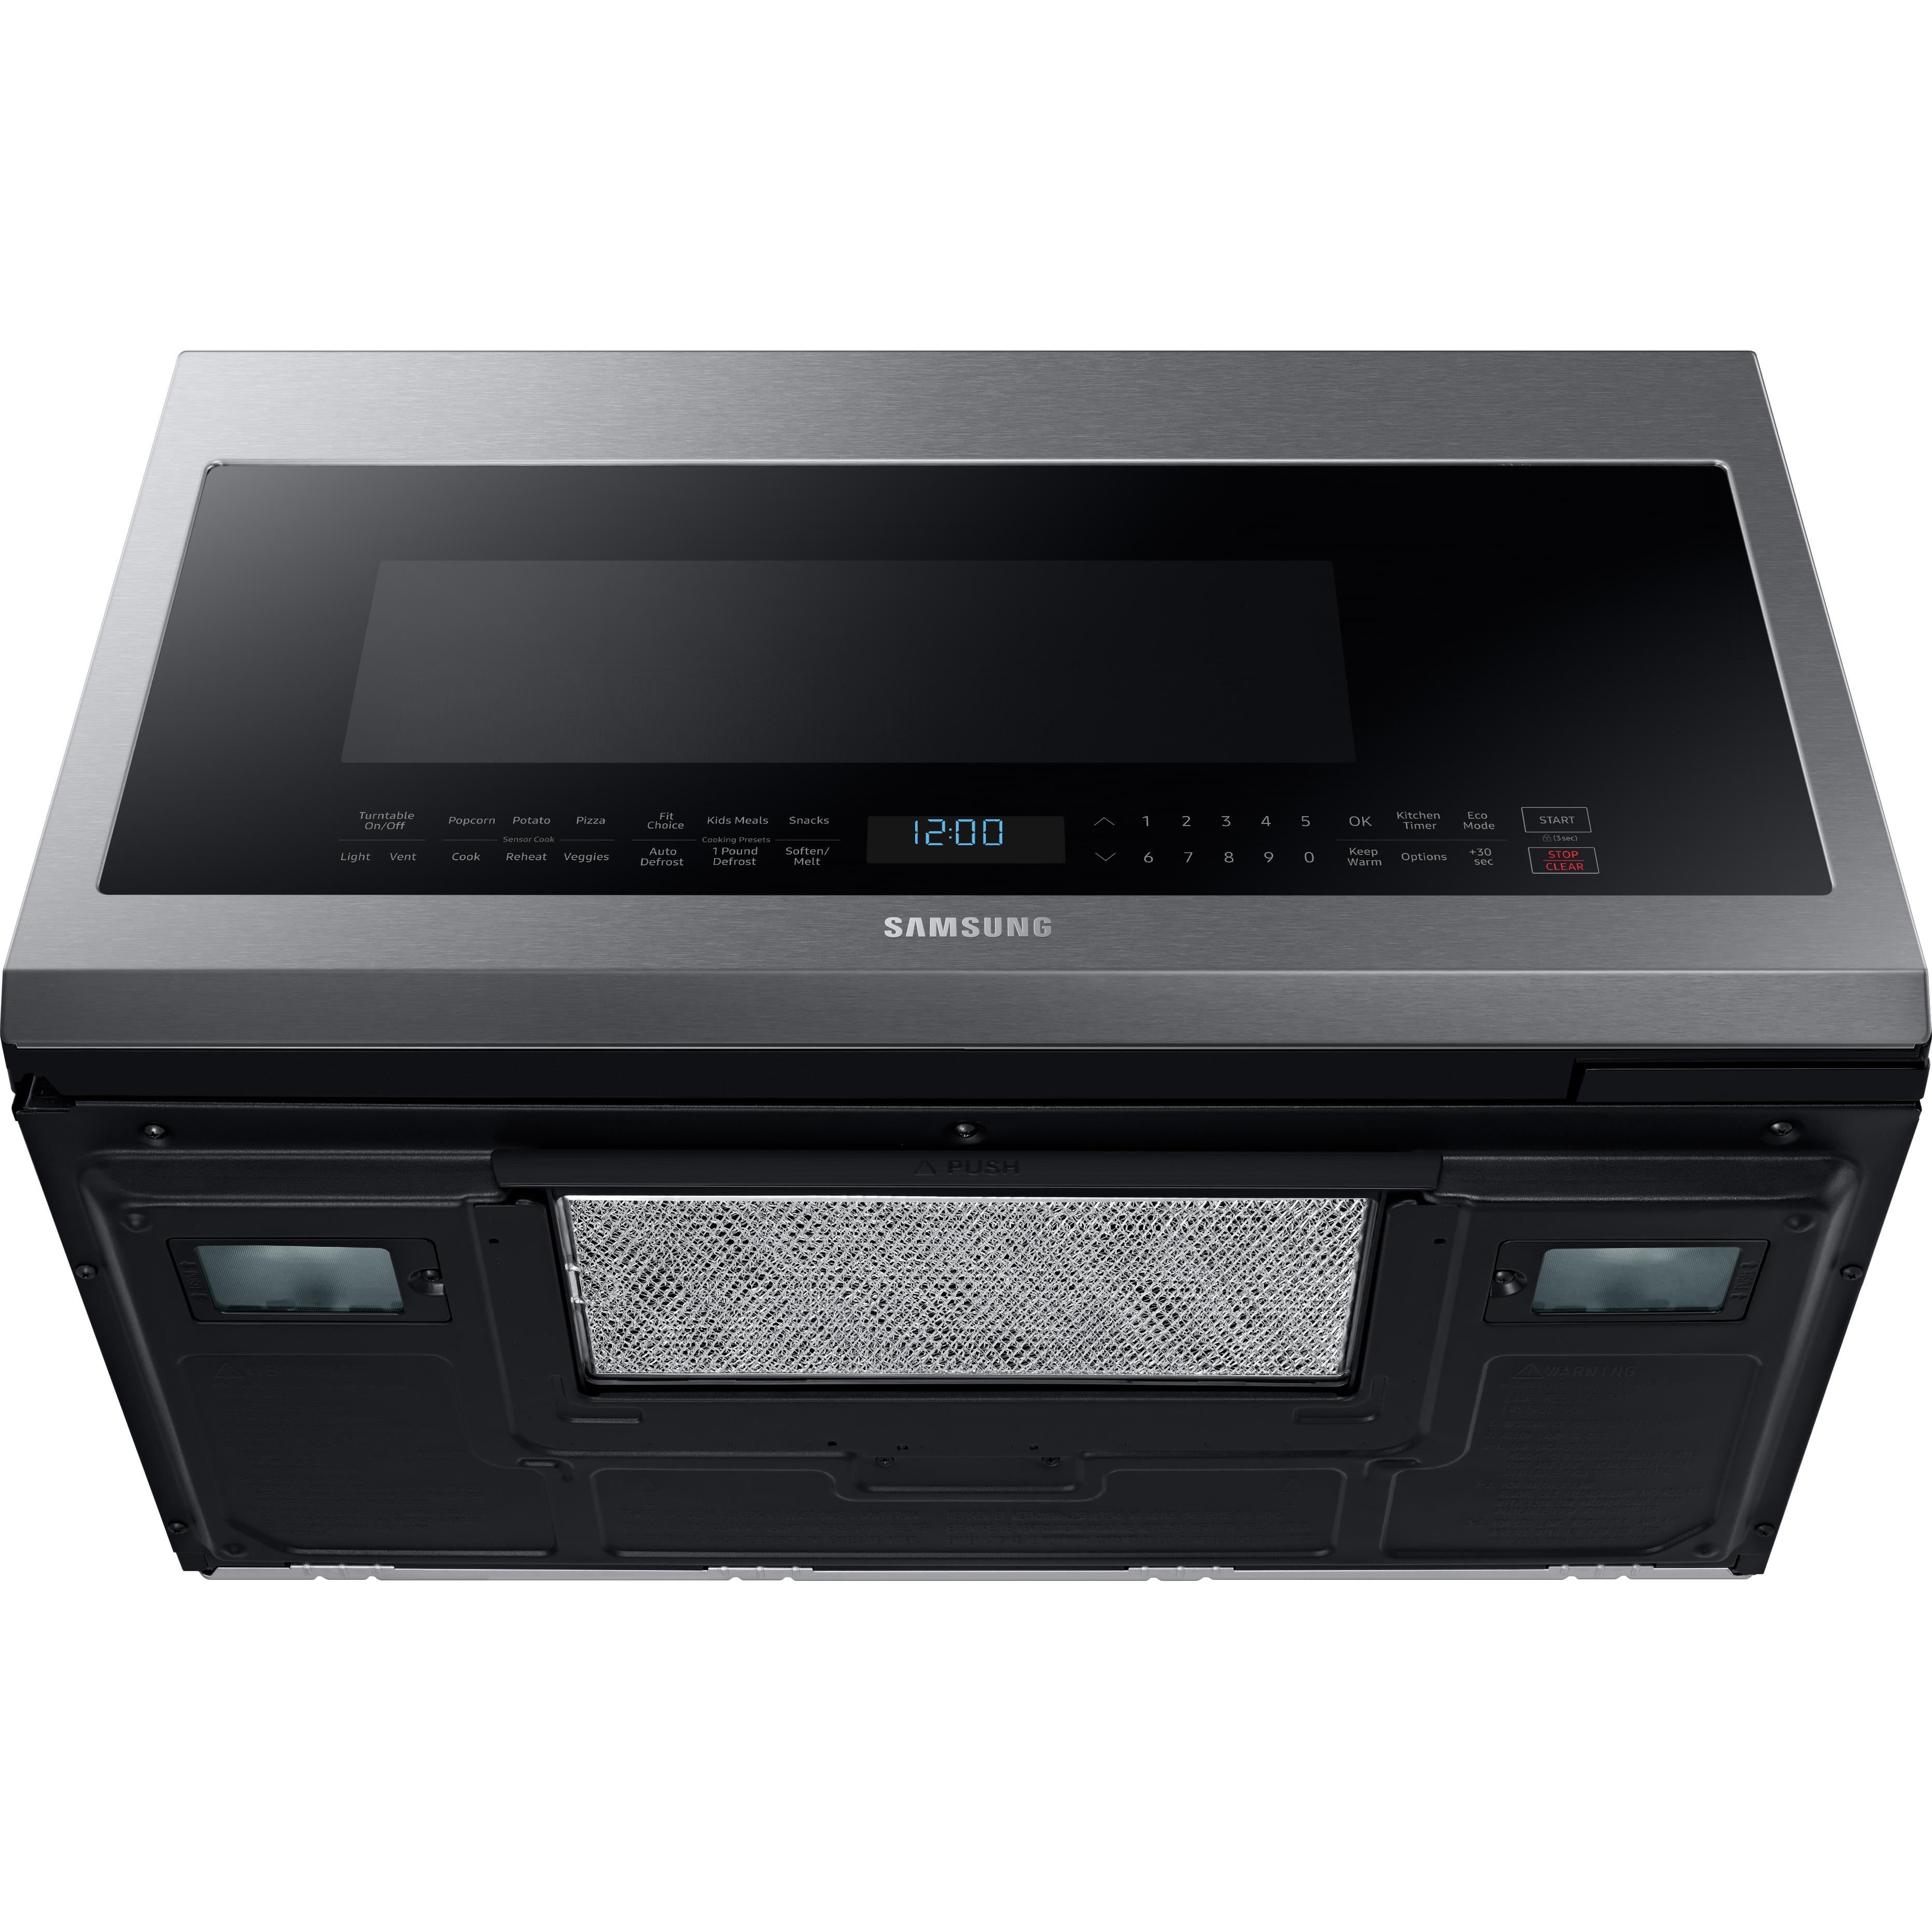 Samsung 30-inch, 2.1 cu.ft. Over-the-Range Microwave Oven with Ventilation System ME21M706BAS/AA